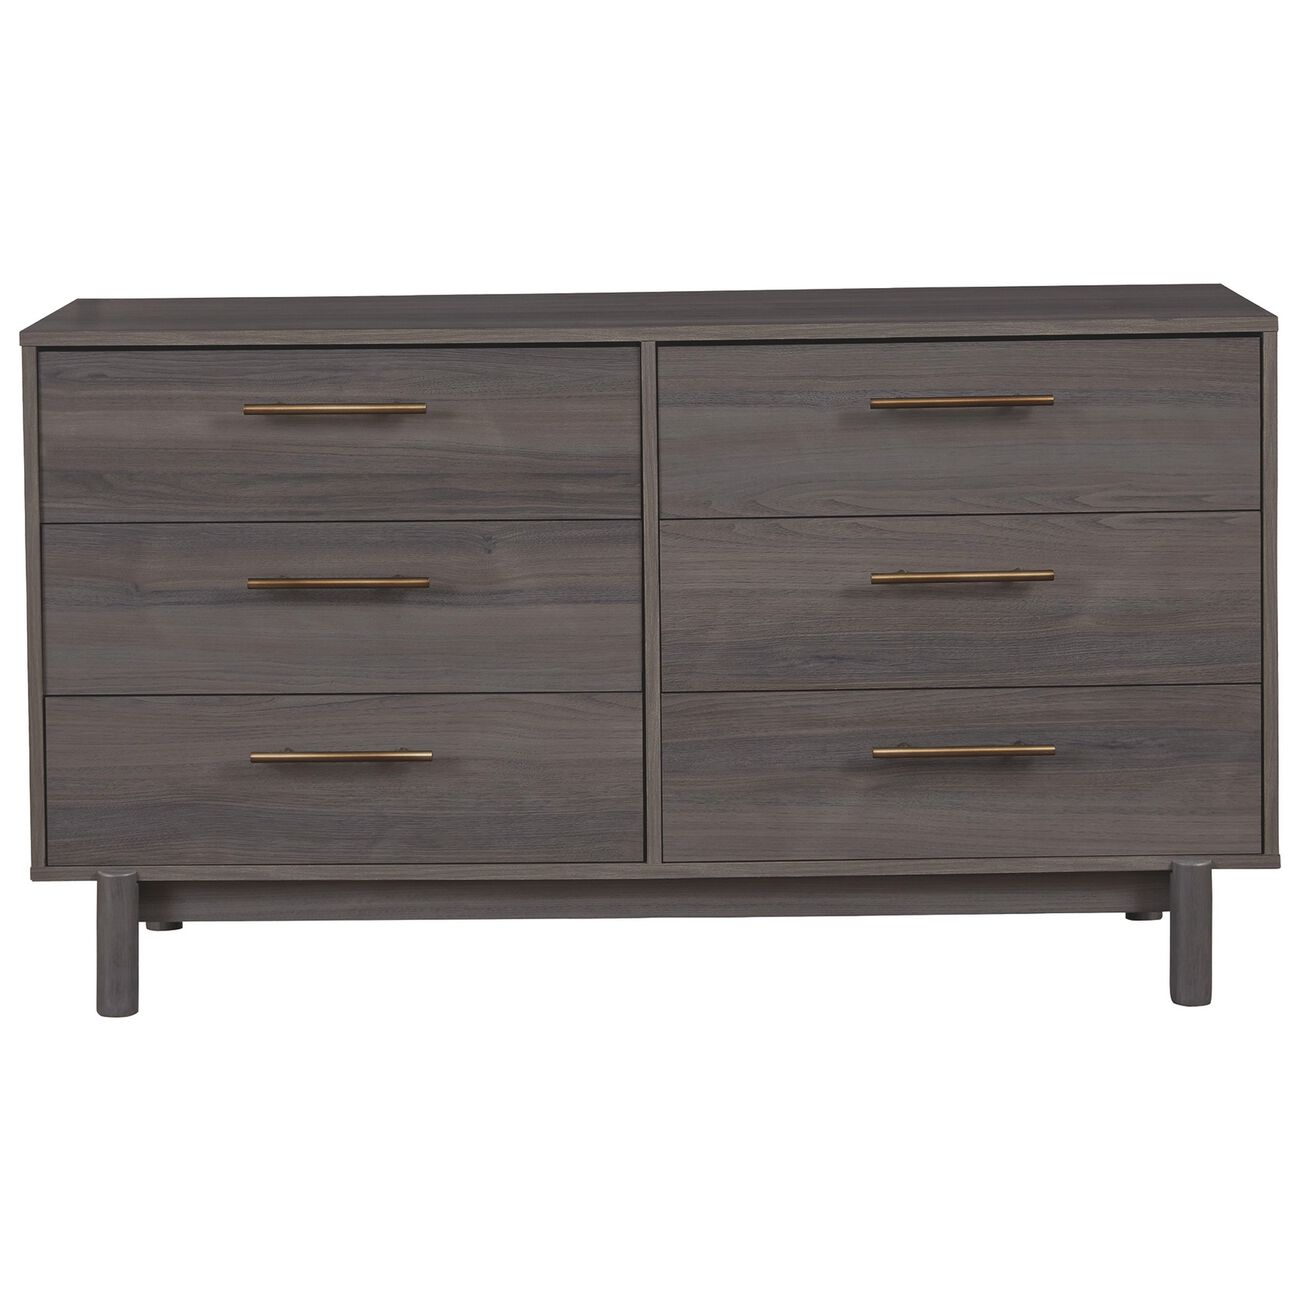 6 Drawer Contemporary Wooden Dresser with Metal Bar Handles, Gray